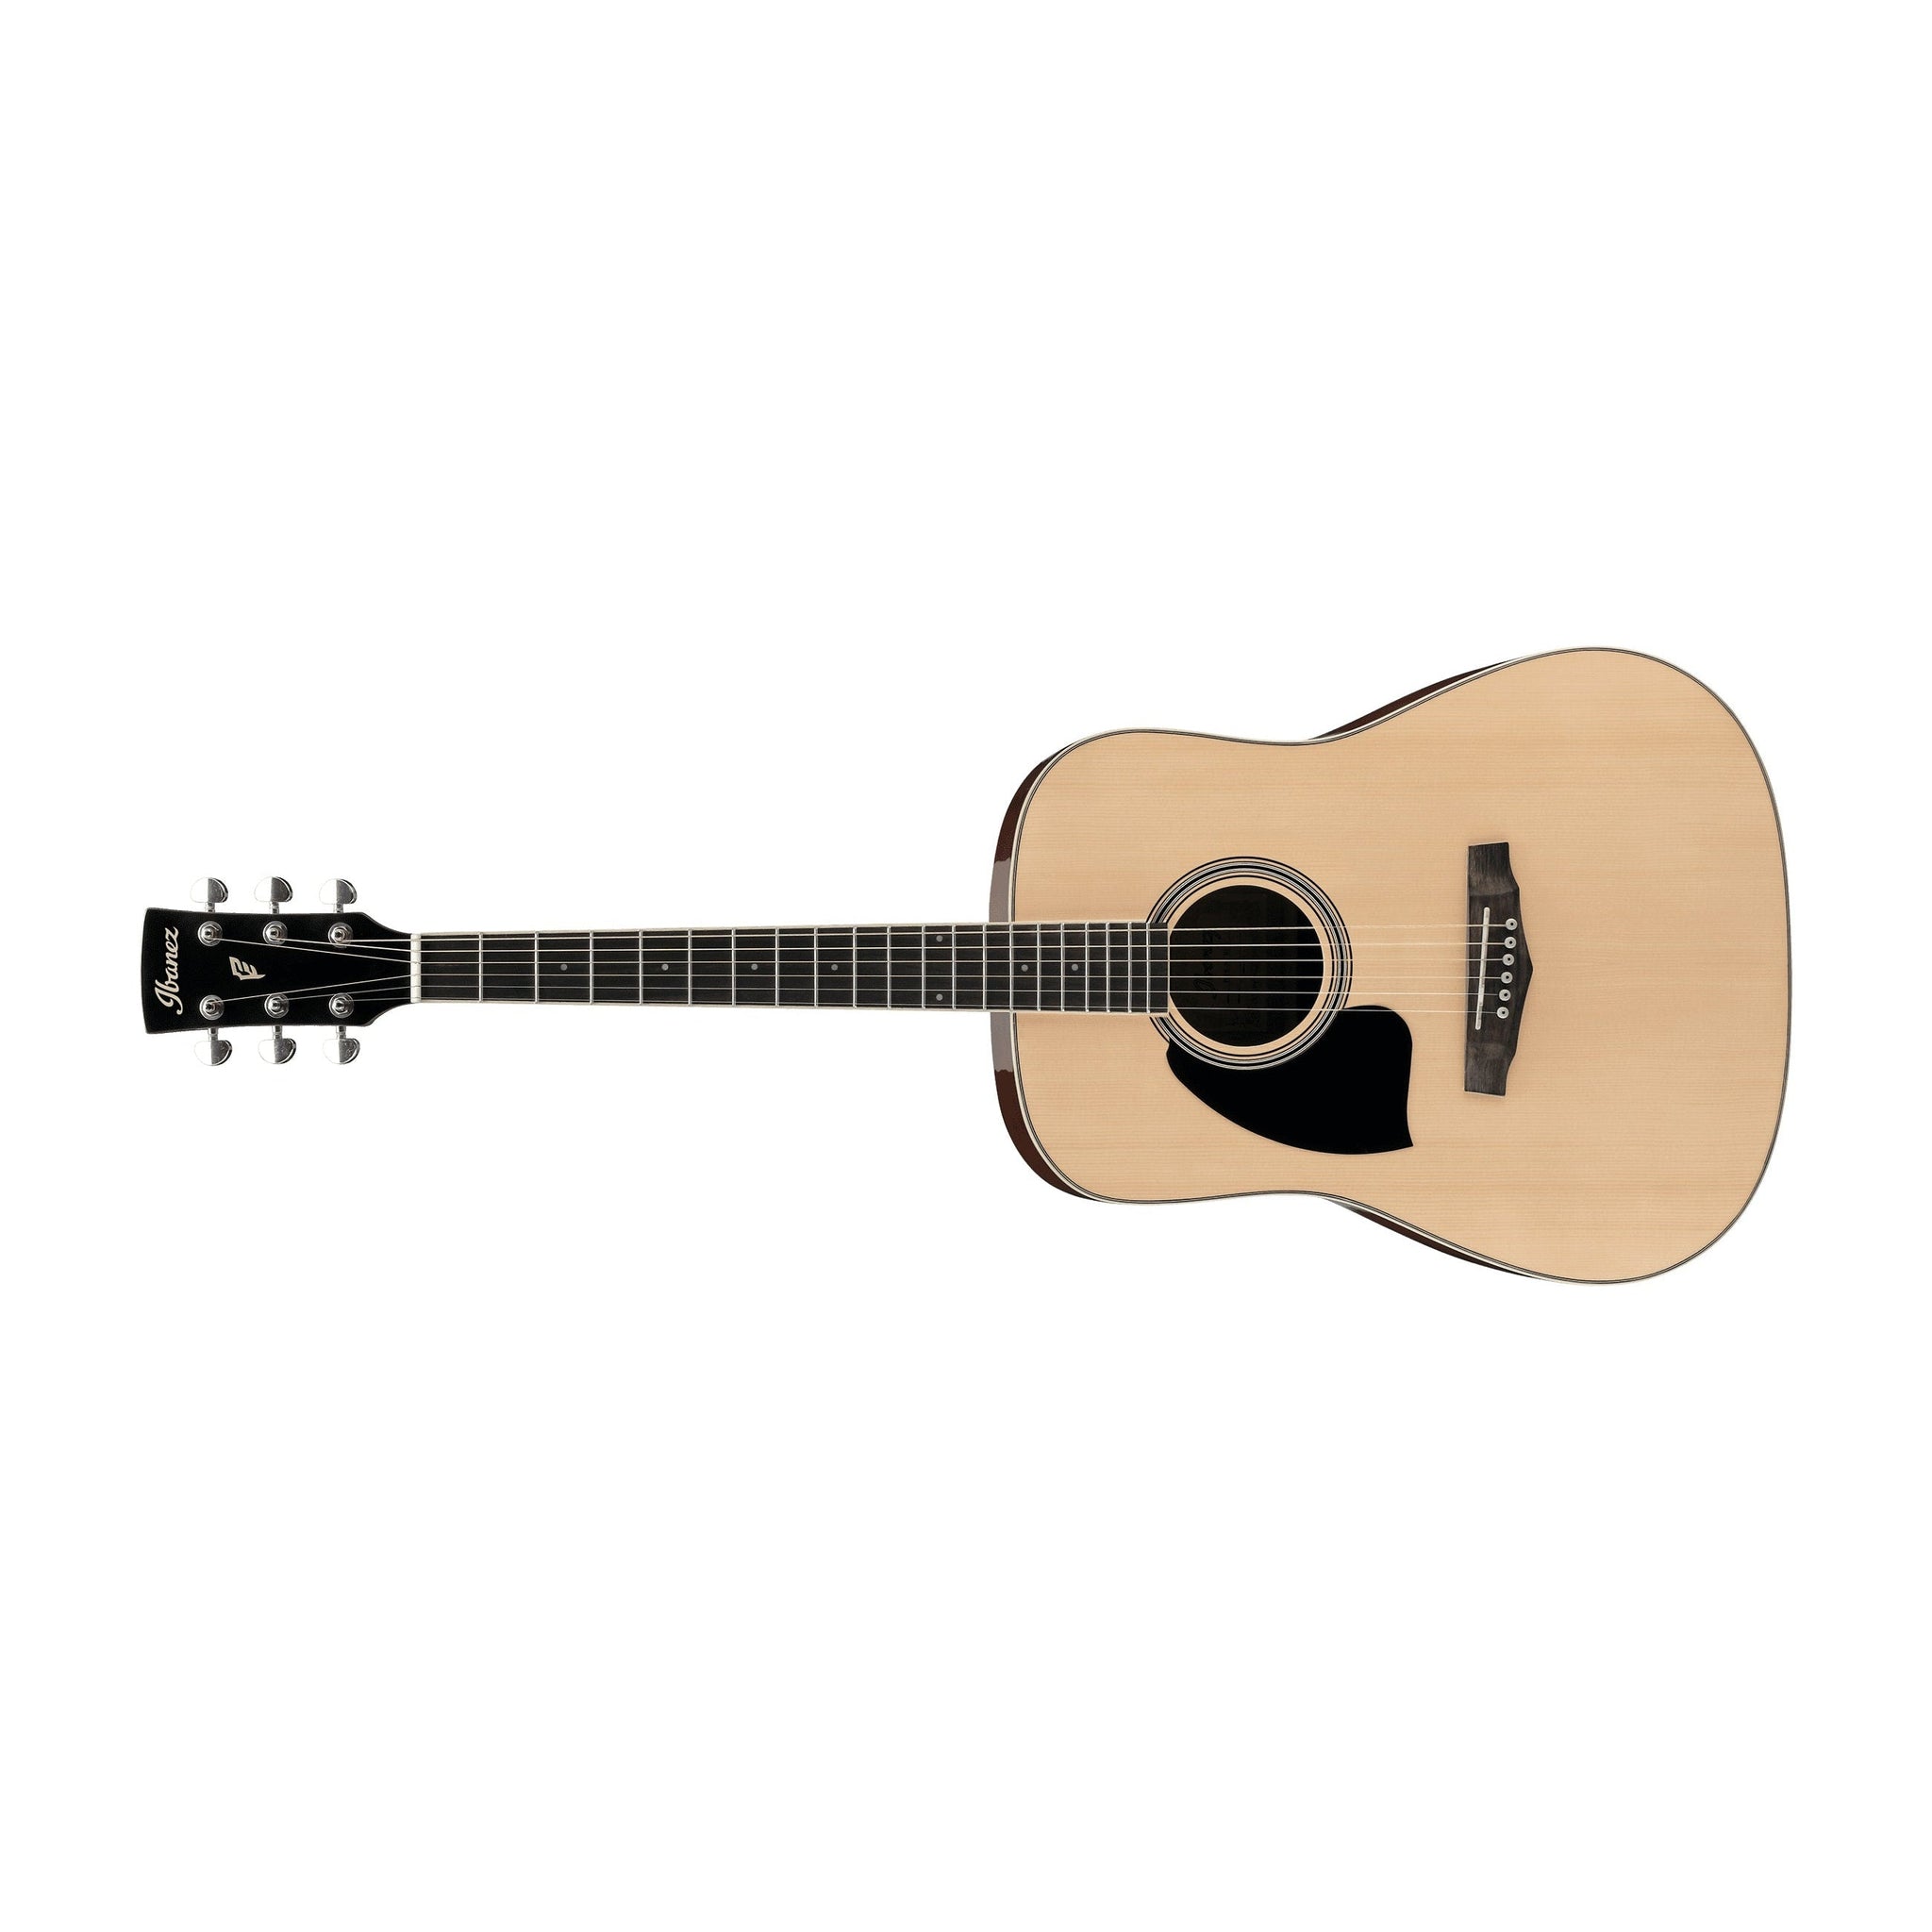 Ibanez PF15L-NT PF Series Left-Handed Dreadnought Acoustic Guitar-Natural-Music World Academy